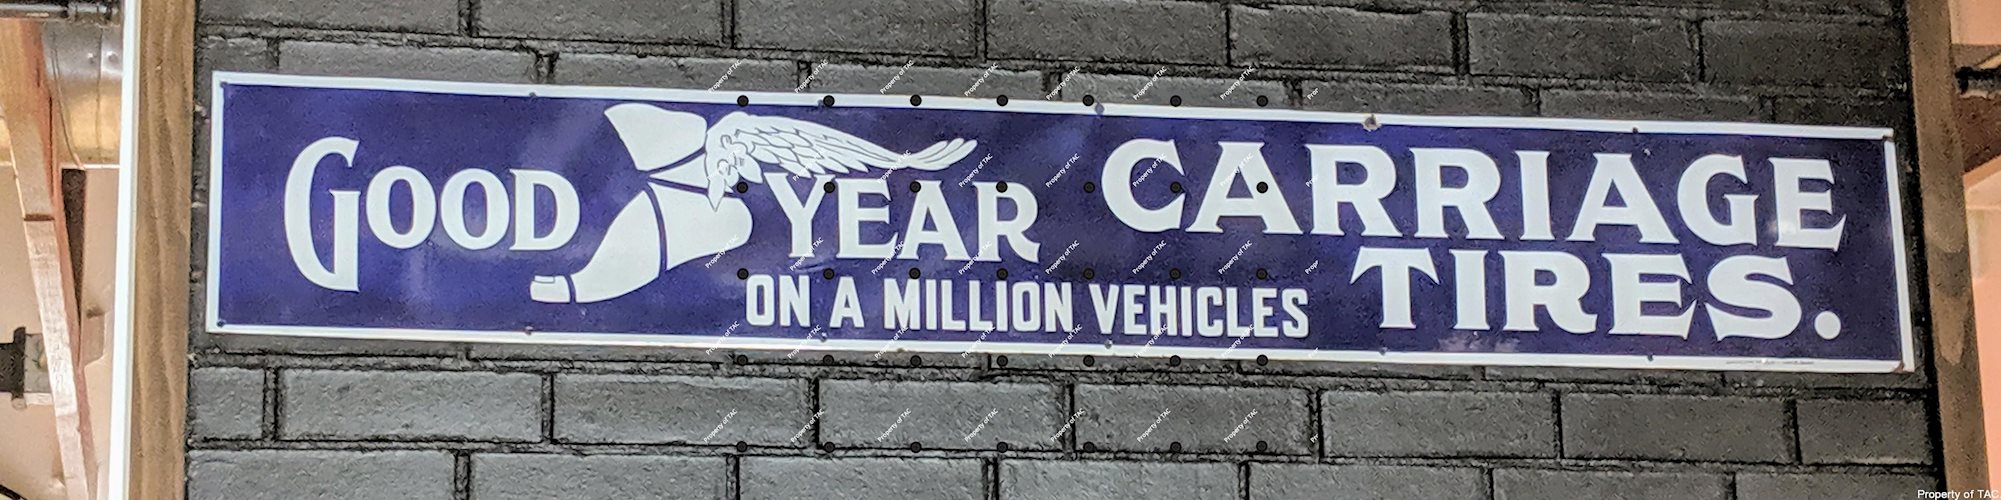 Good Year Carriage Tires on a Million Vehicles SSP Single Sided Porcelain Sign